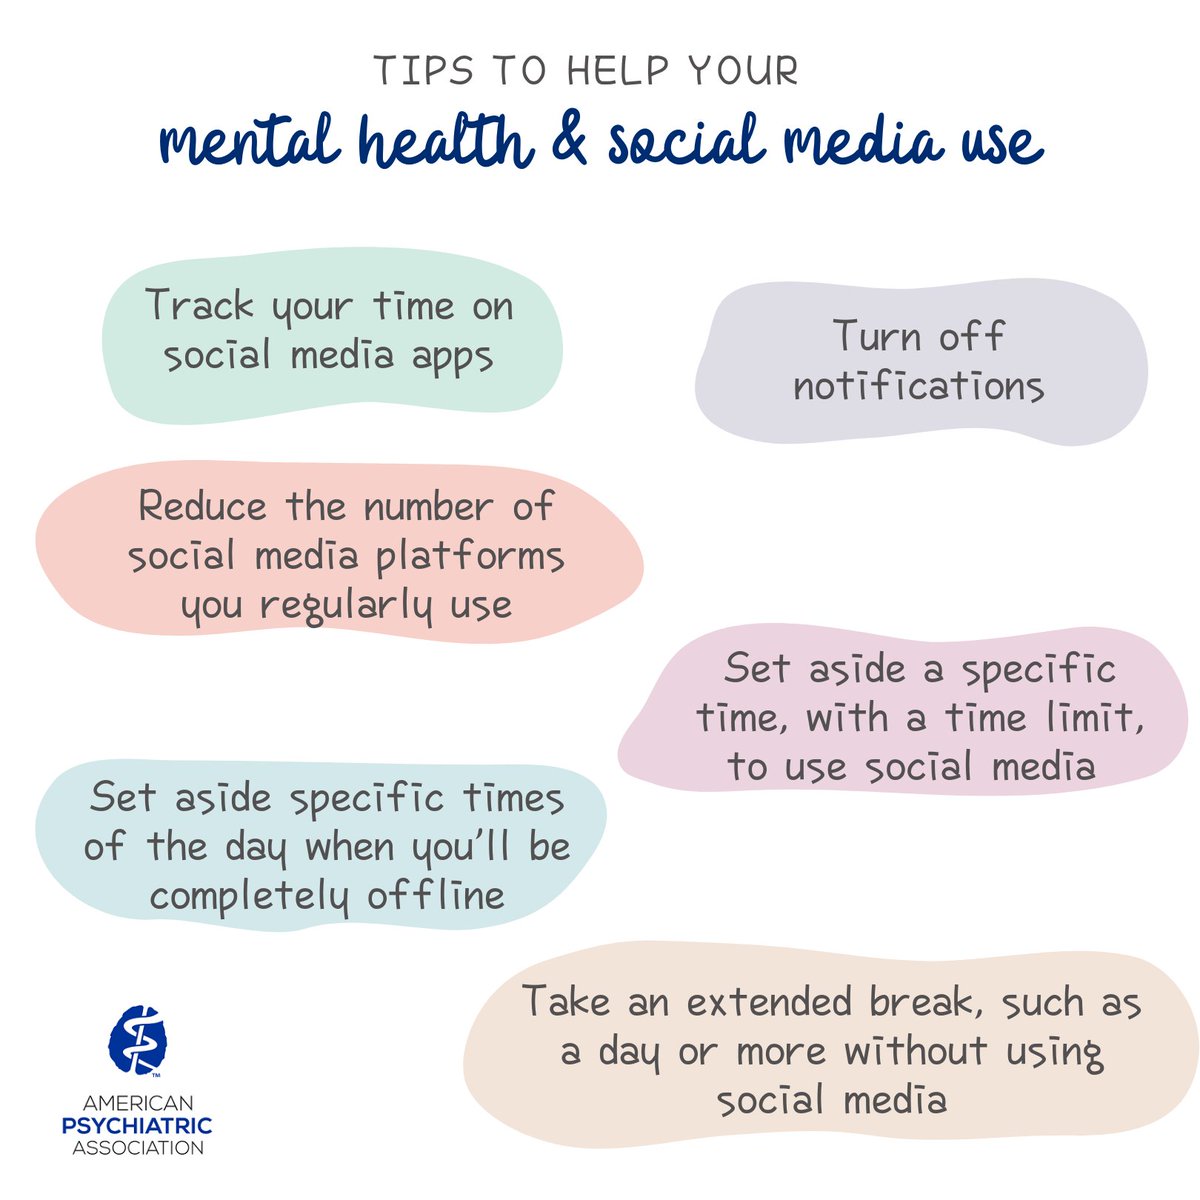 Even if you are not experiencing especially negative impacts, social media and its continual ups and downs can be a drain on wellbeing. Here are a few tips to help control/manage your social media use. #mentalhealth #socialmedia